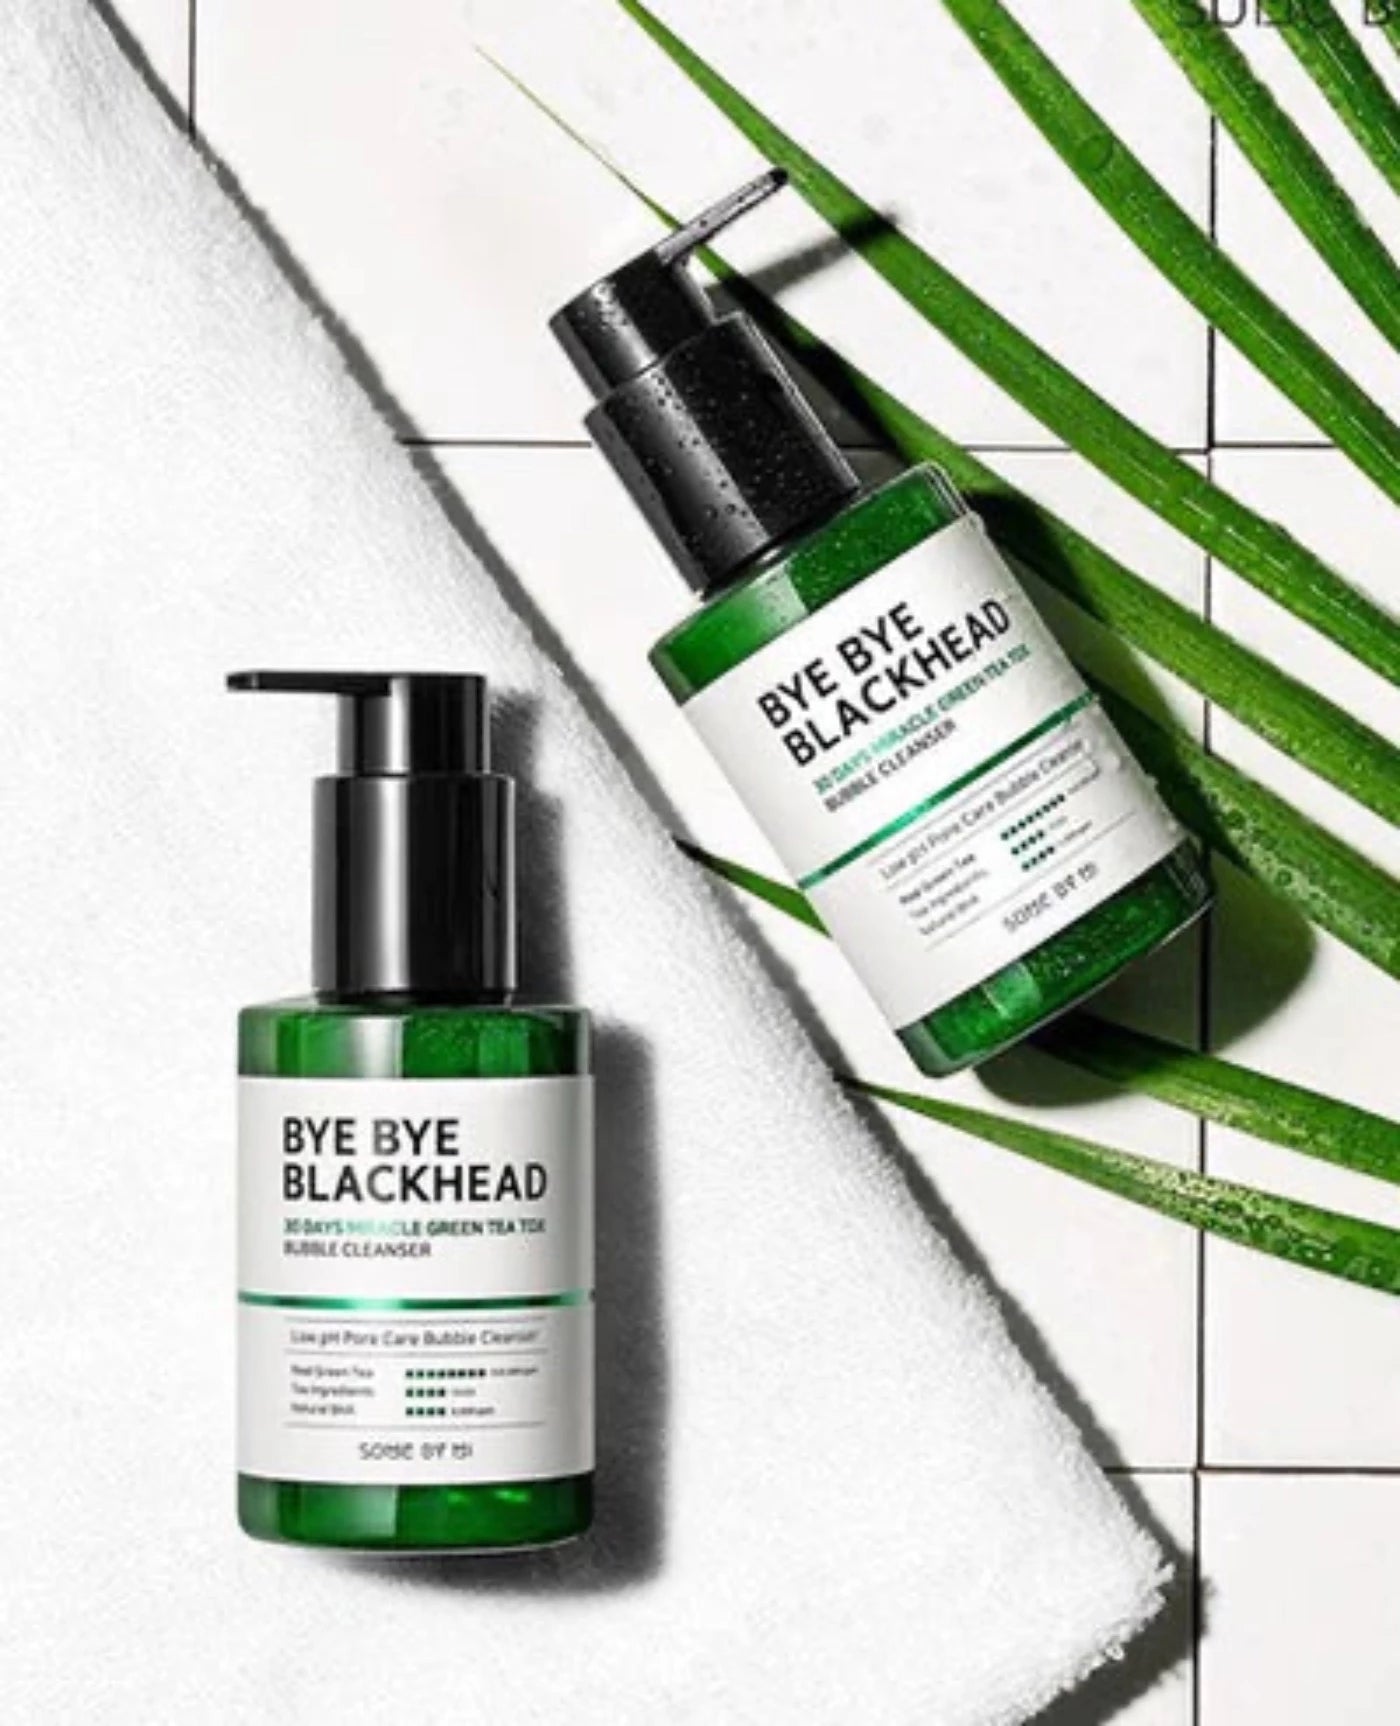 Some By Mi Bye Bye Blackhead 30days Miracle Green Tea Cleanser washes the entire face without harshness, helps regulate sebum production, boasts antioxidant effects and prevents skin dryness.